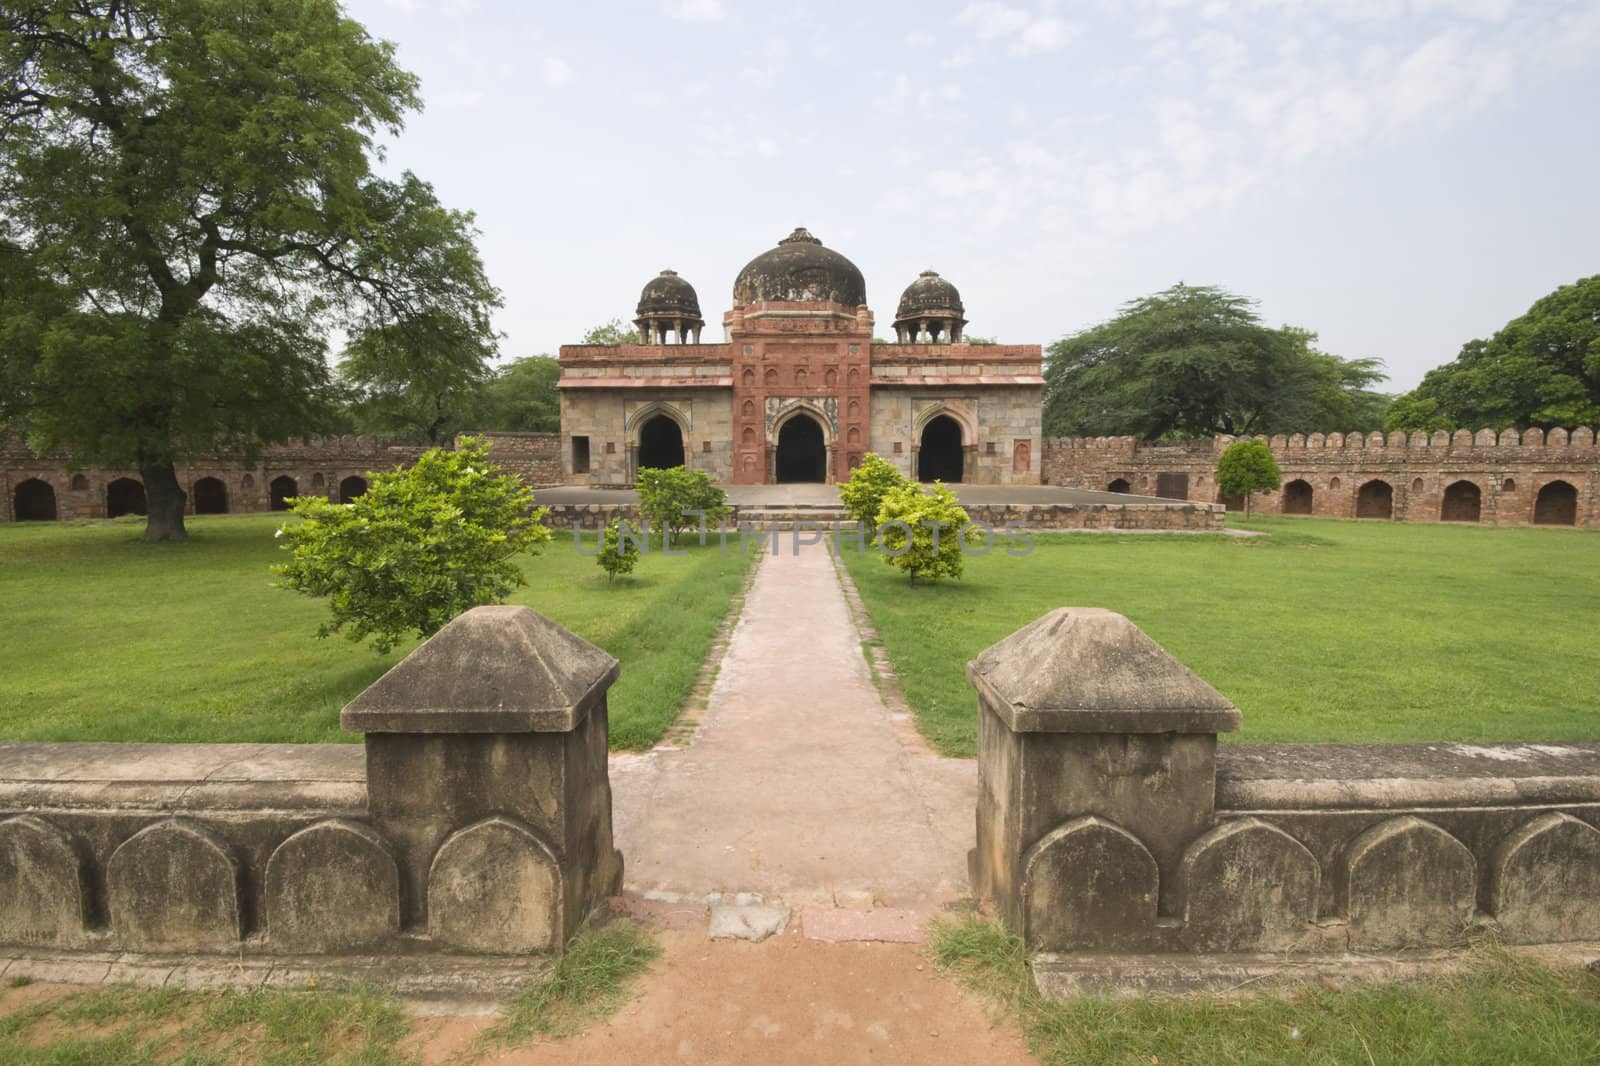 Mosque at Isa Khan's Tomb. Islamic style building set in landscaped gardens. Humayun's Tomb complex, Delhi, India